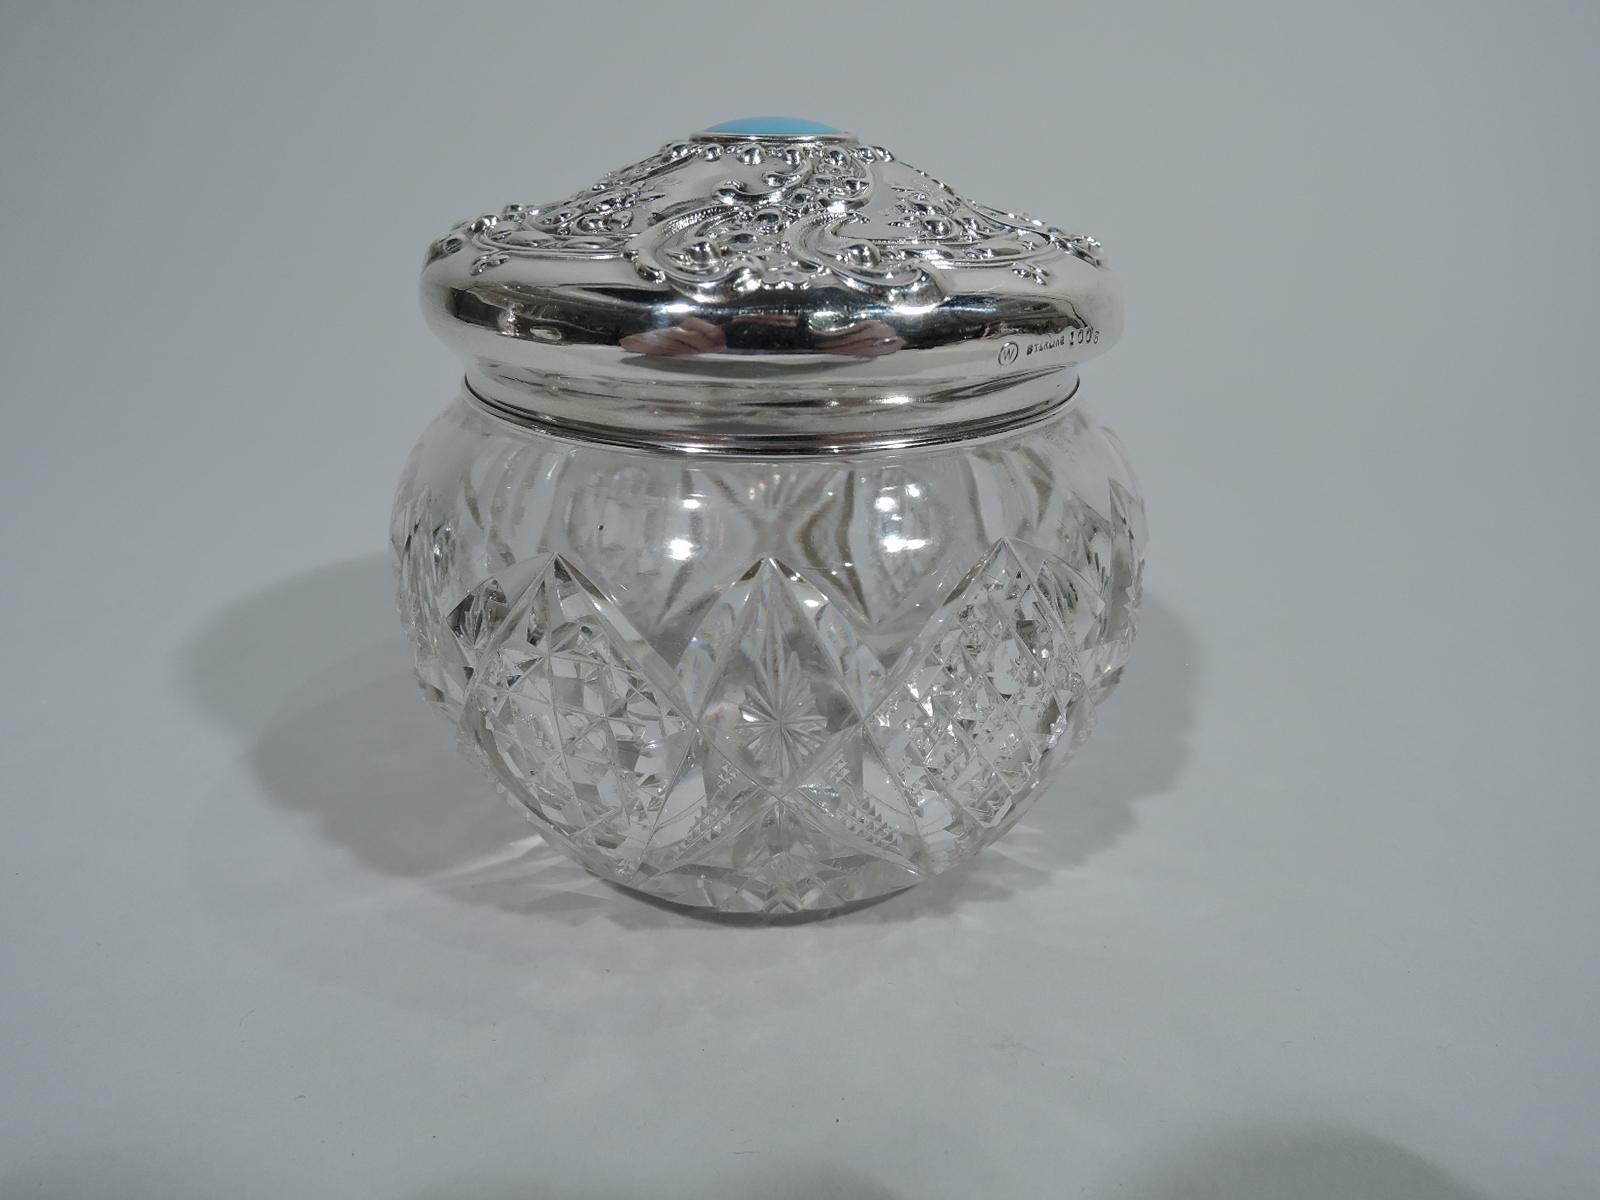 American brilliant-cut glass vanity jar with sterling silver cover. Jar has curved and ornamented sides. Star on underside. Cover has repousse scrolls and flowers and central inset opalescent stone or glass. Hallmark includes no. 1006 and maker’s